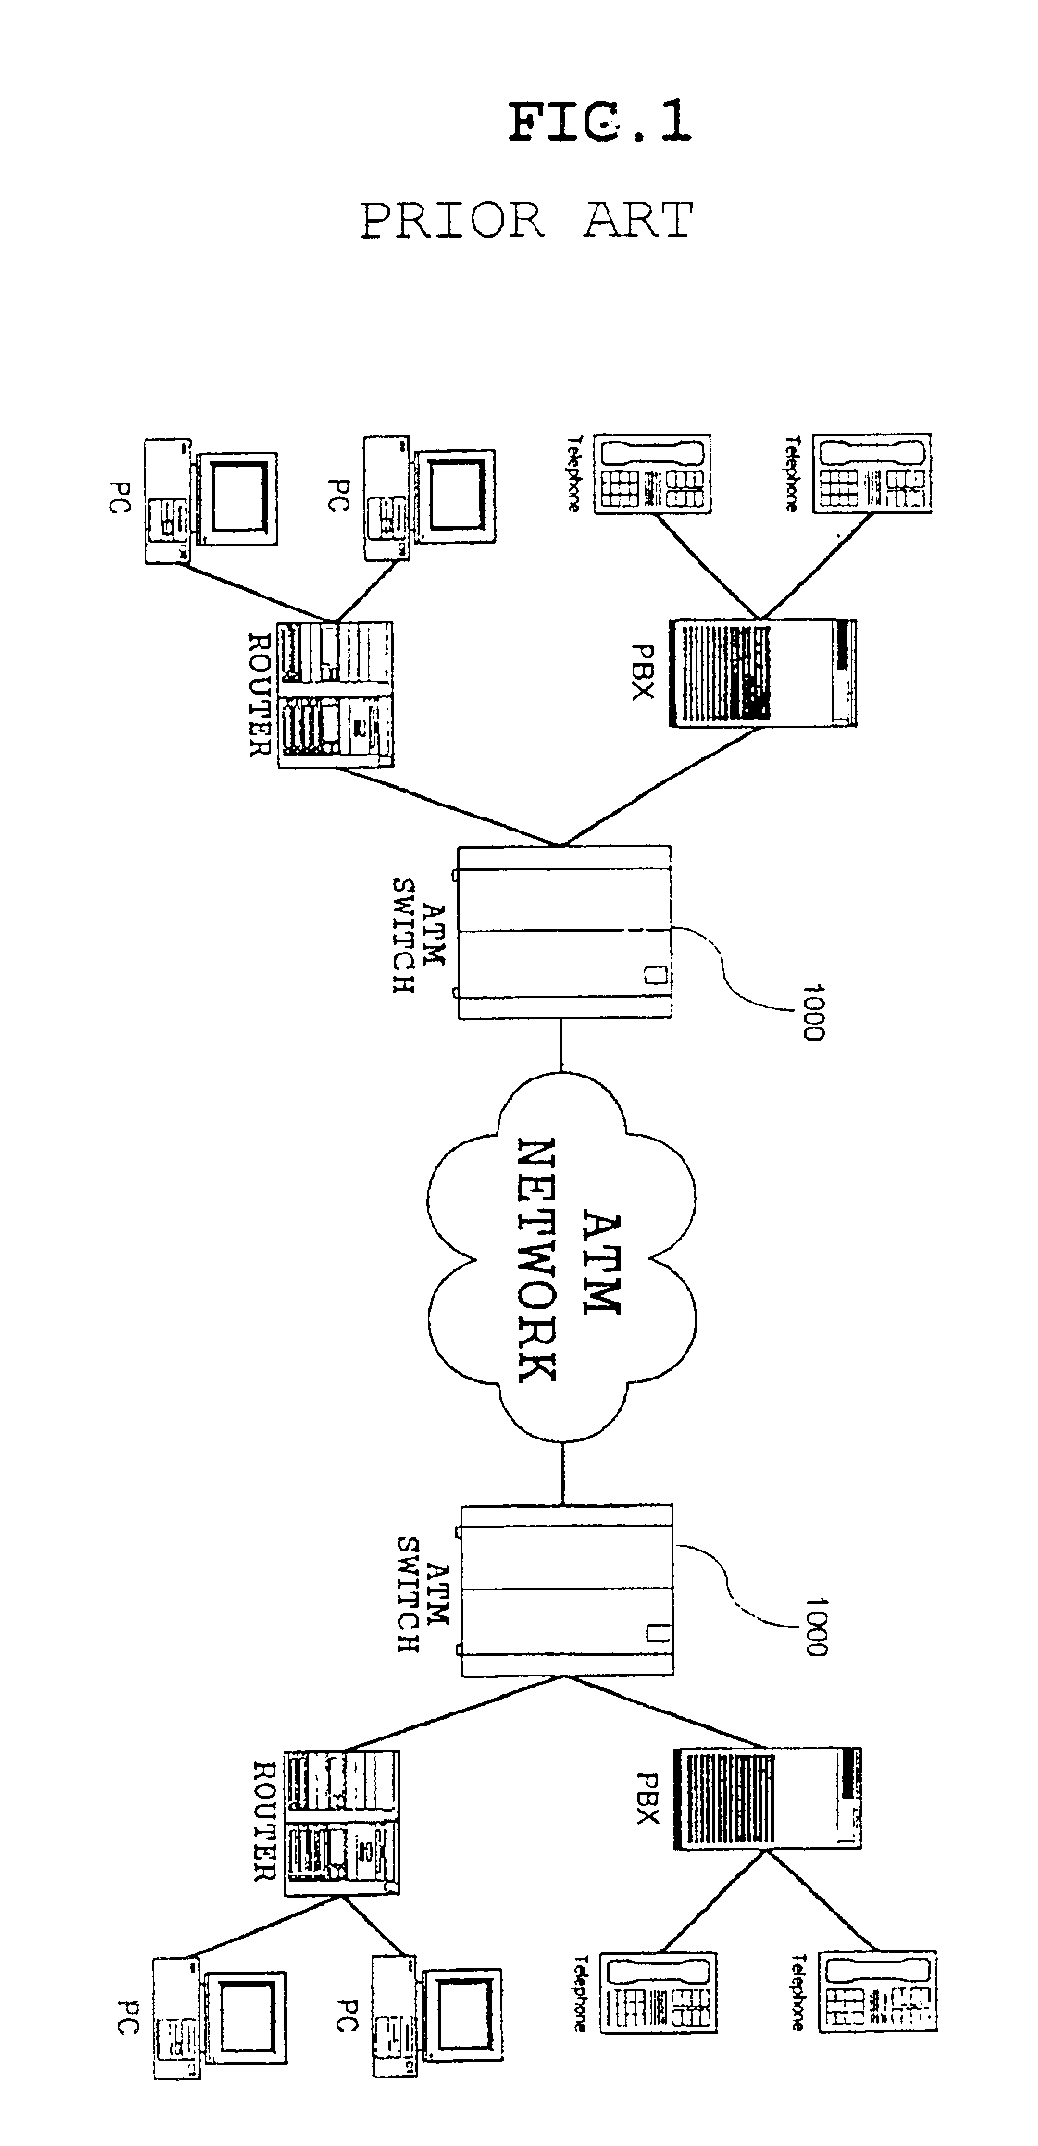 Apparatus and method for delay bound weighted round robin cell scheduling in asynchronous transfer mode switch